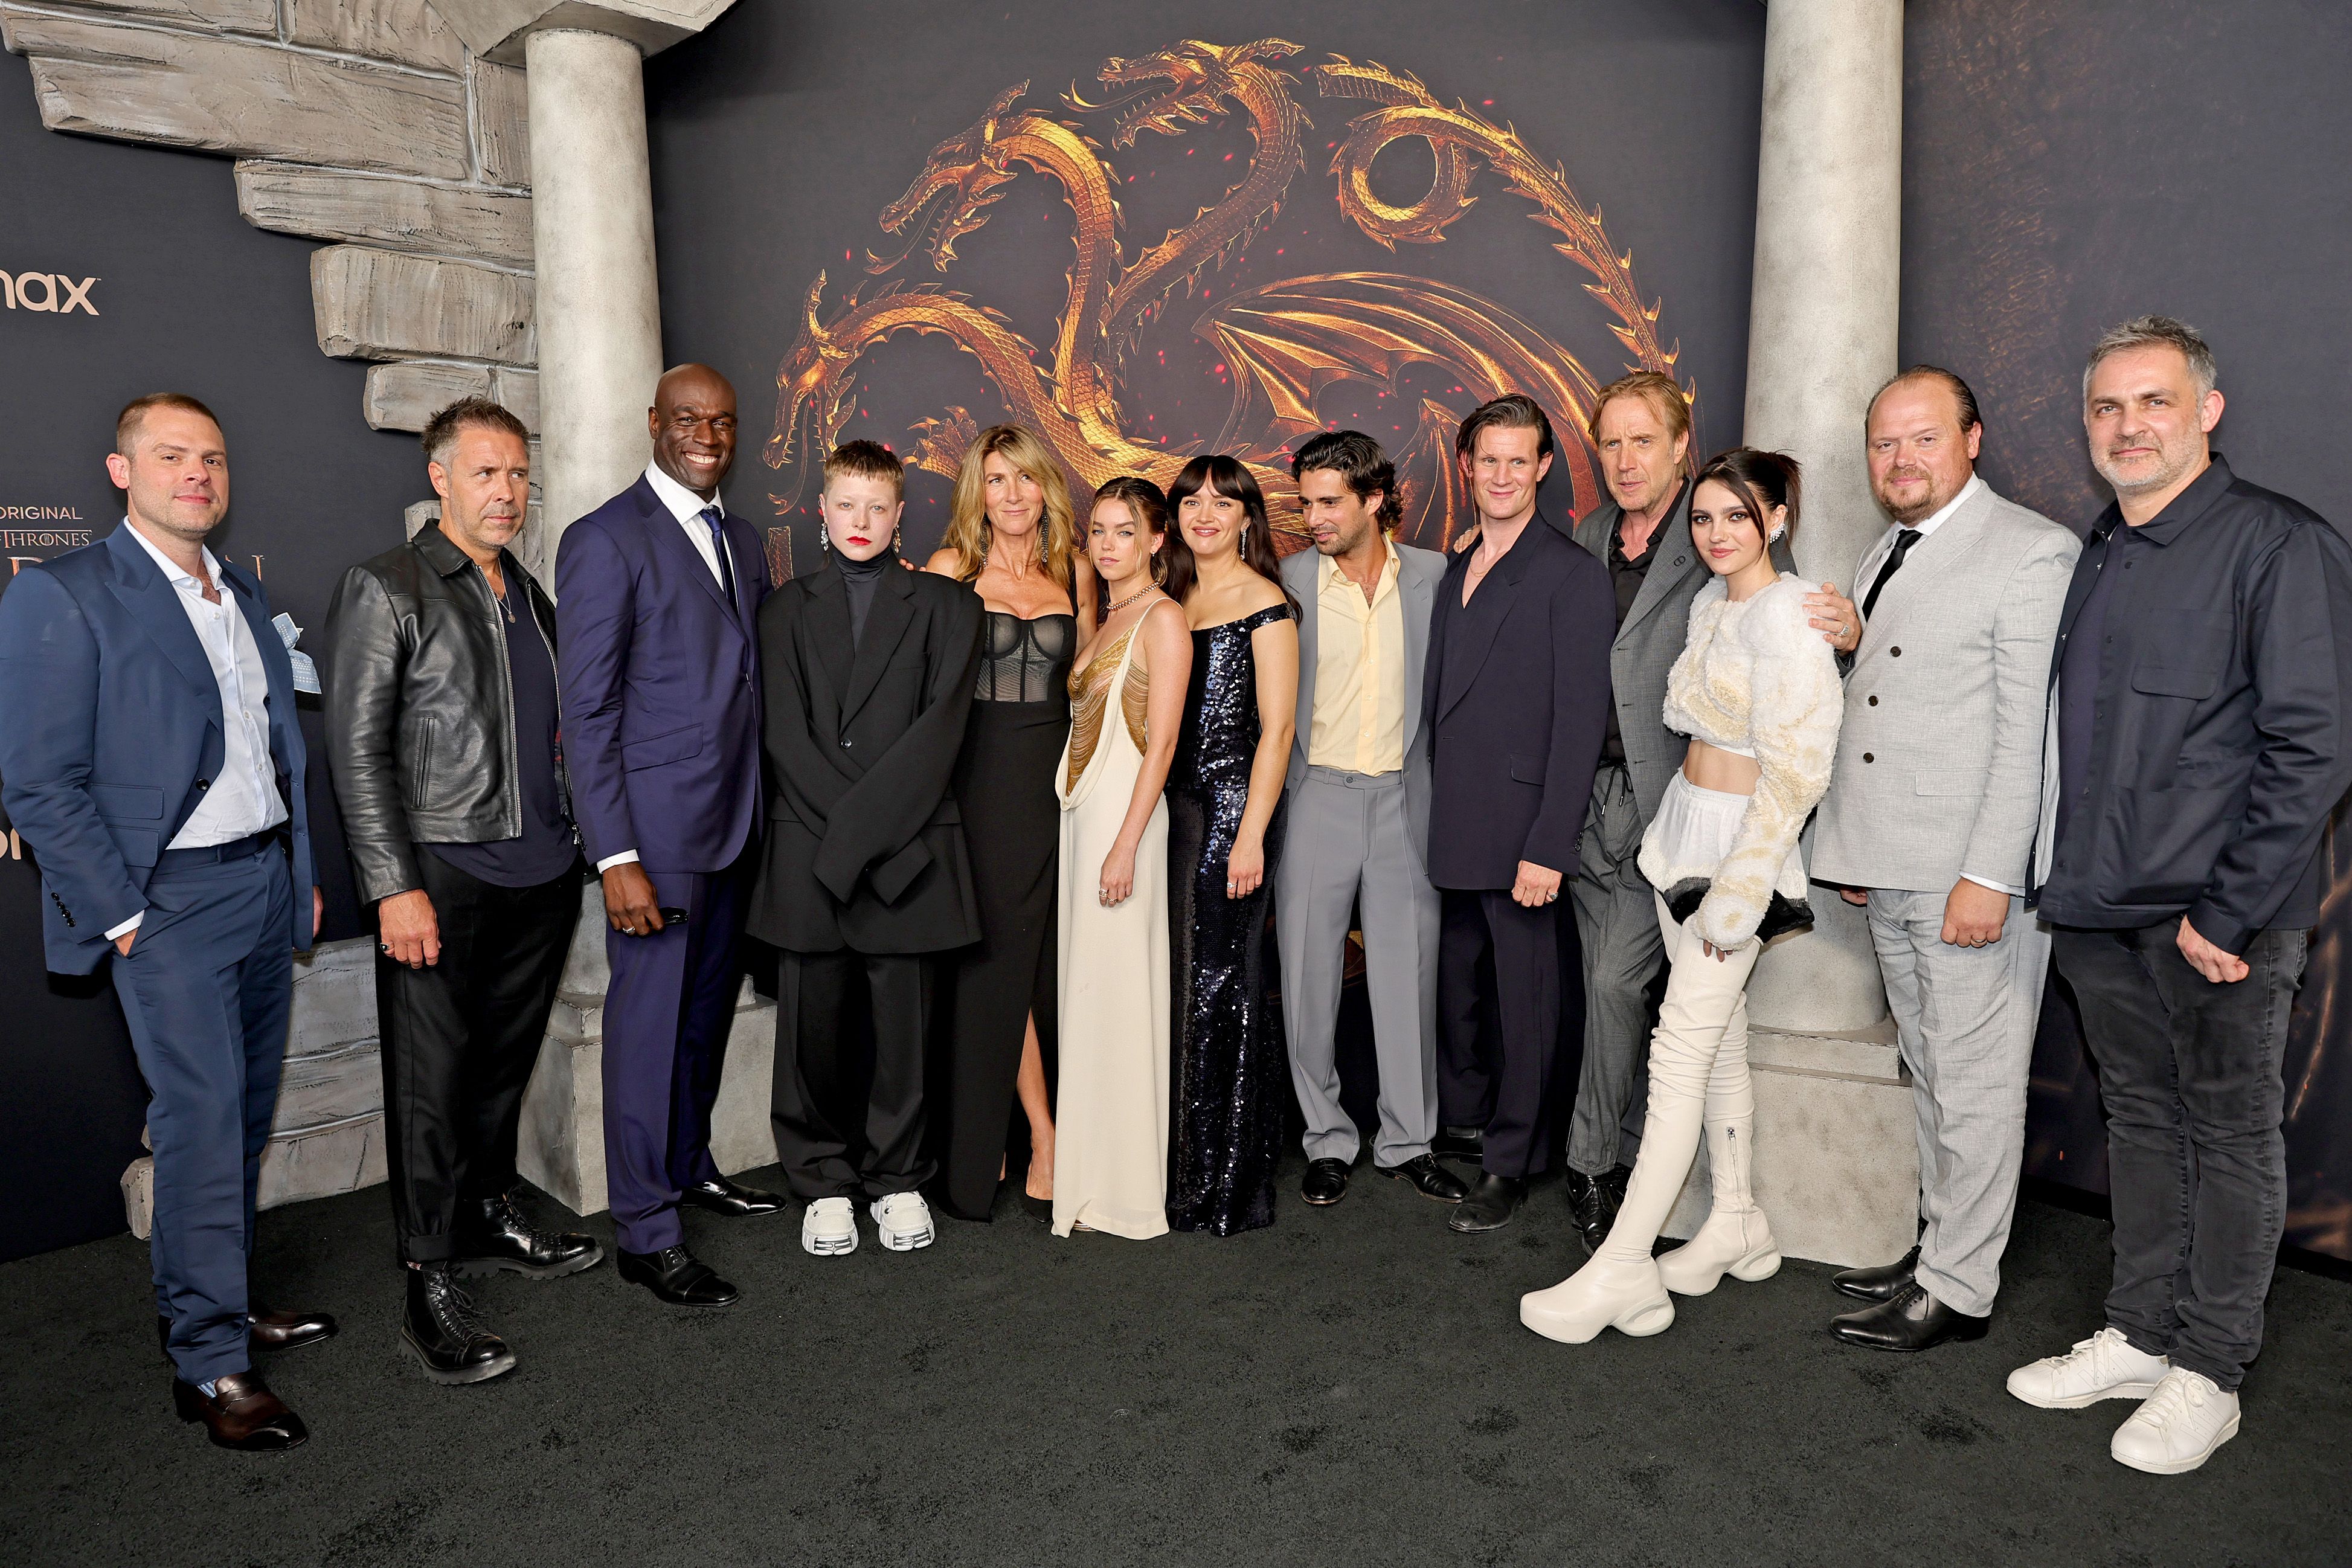 House of the Dragon' Season 2: Release Date Speculation, Cast